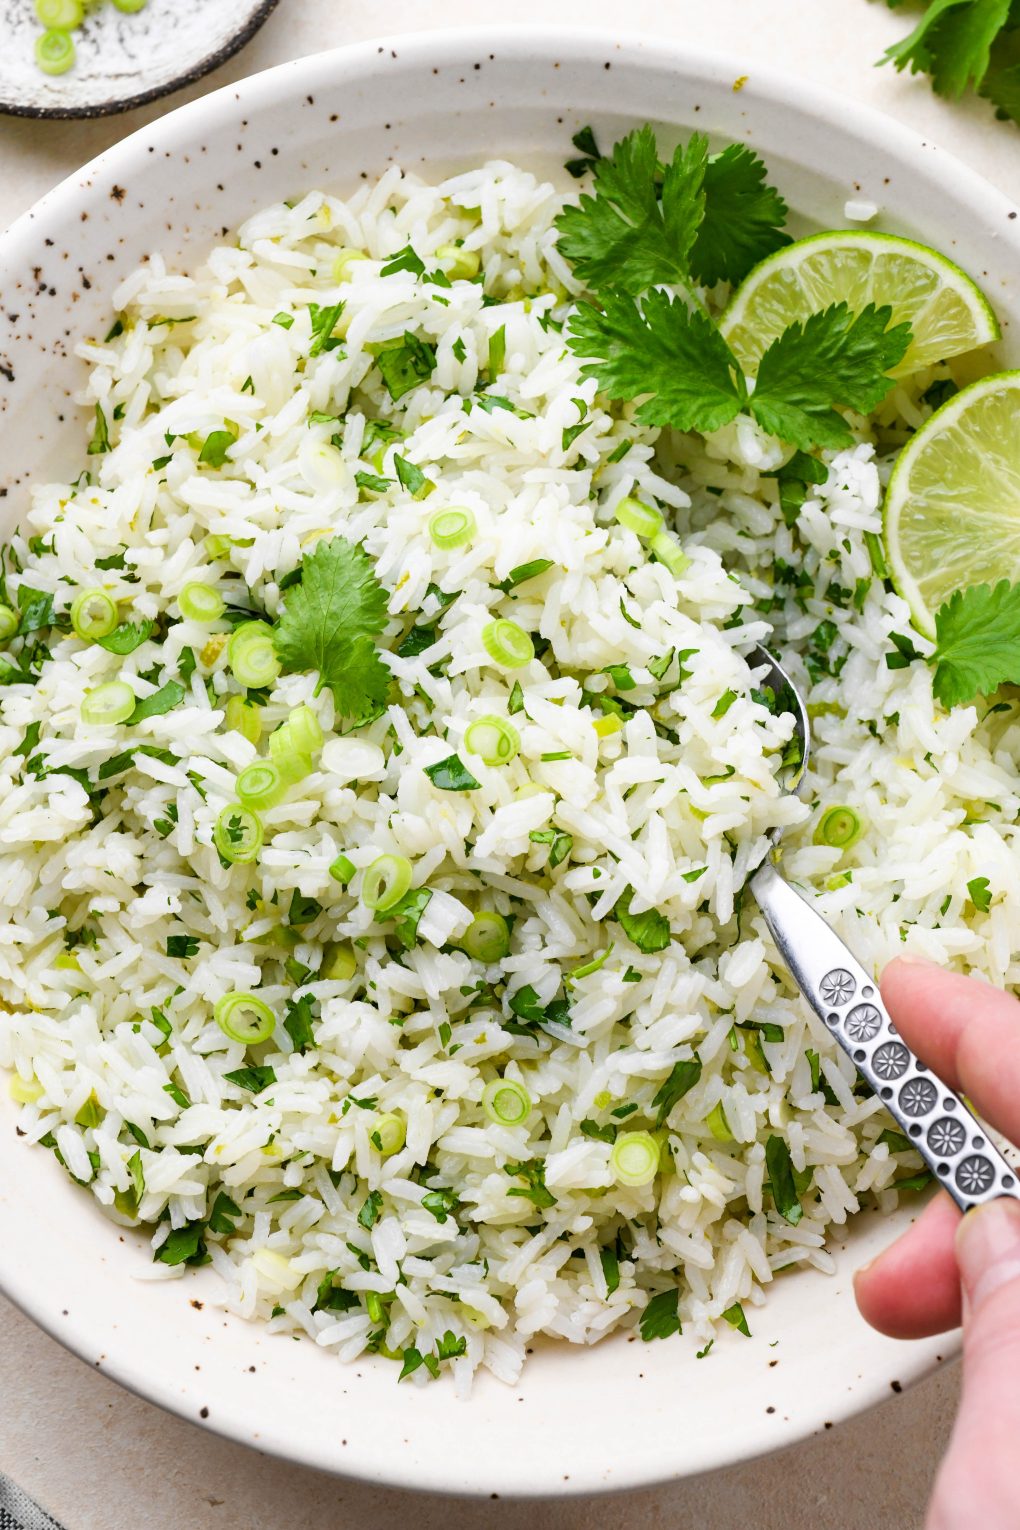 A large speckled ceramic bowl of cilantro lime rice, topped with thinly sliced green onion, cilantro leaves, and lime wedges, with a spoon lifting some rice out of the bowl.